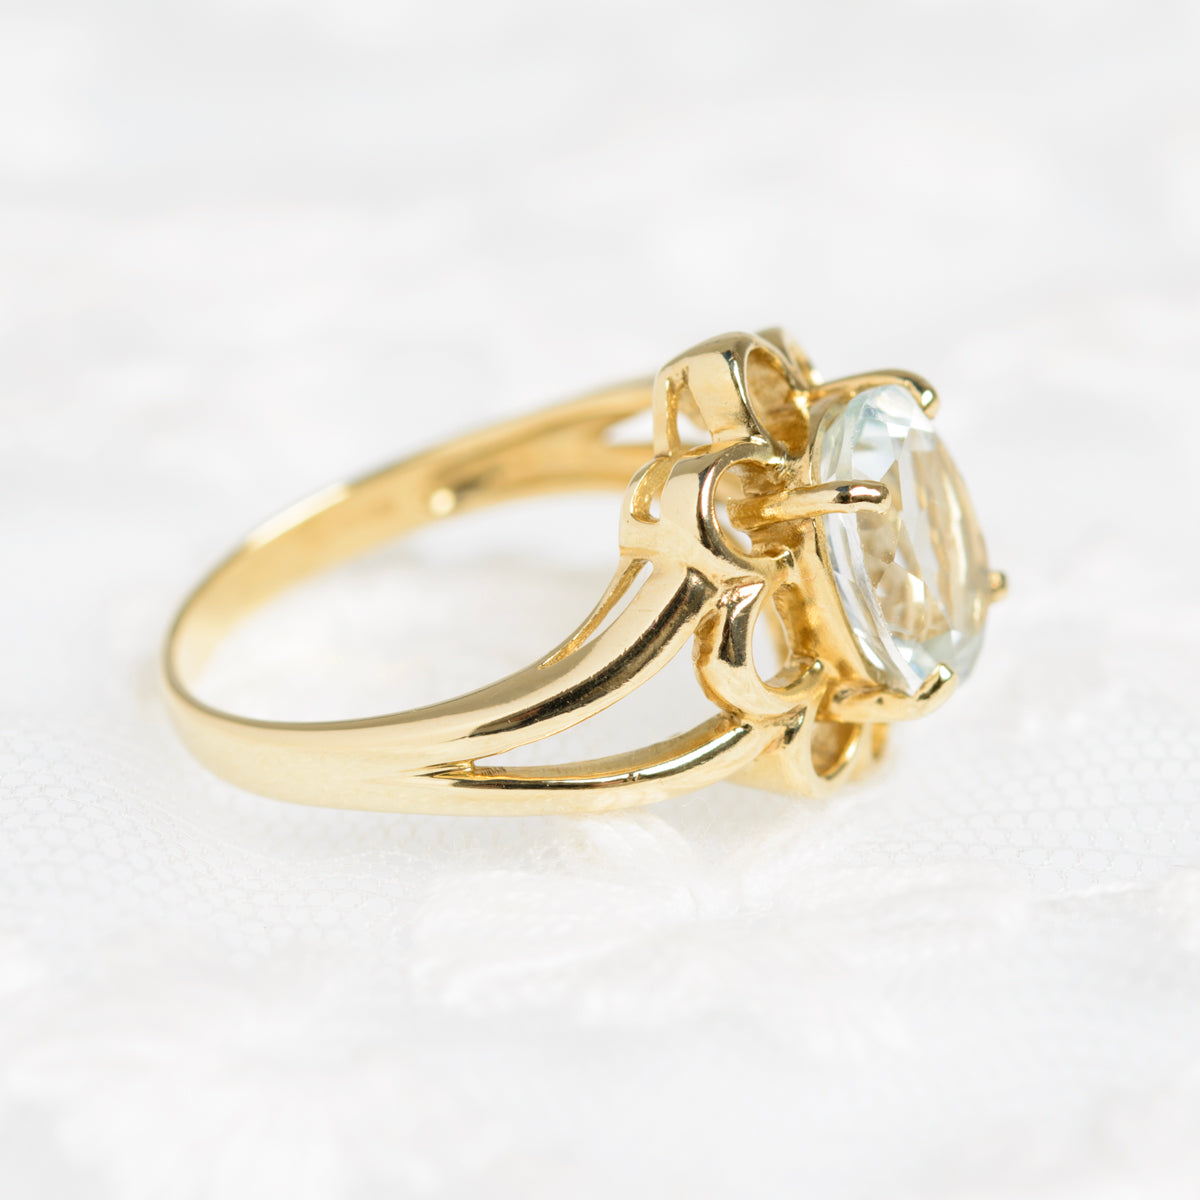 9ct Gold Ladies Dress Ring With 2.4 Carat Aquamarine In Petal Mount Size N  (A1427)